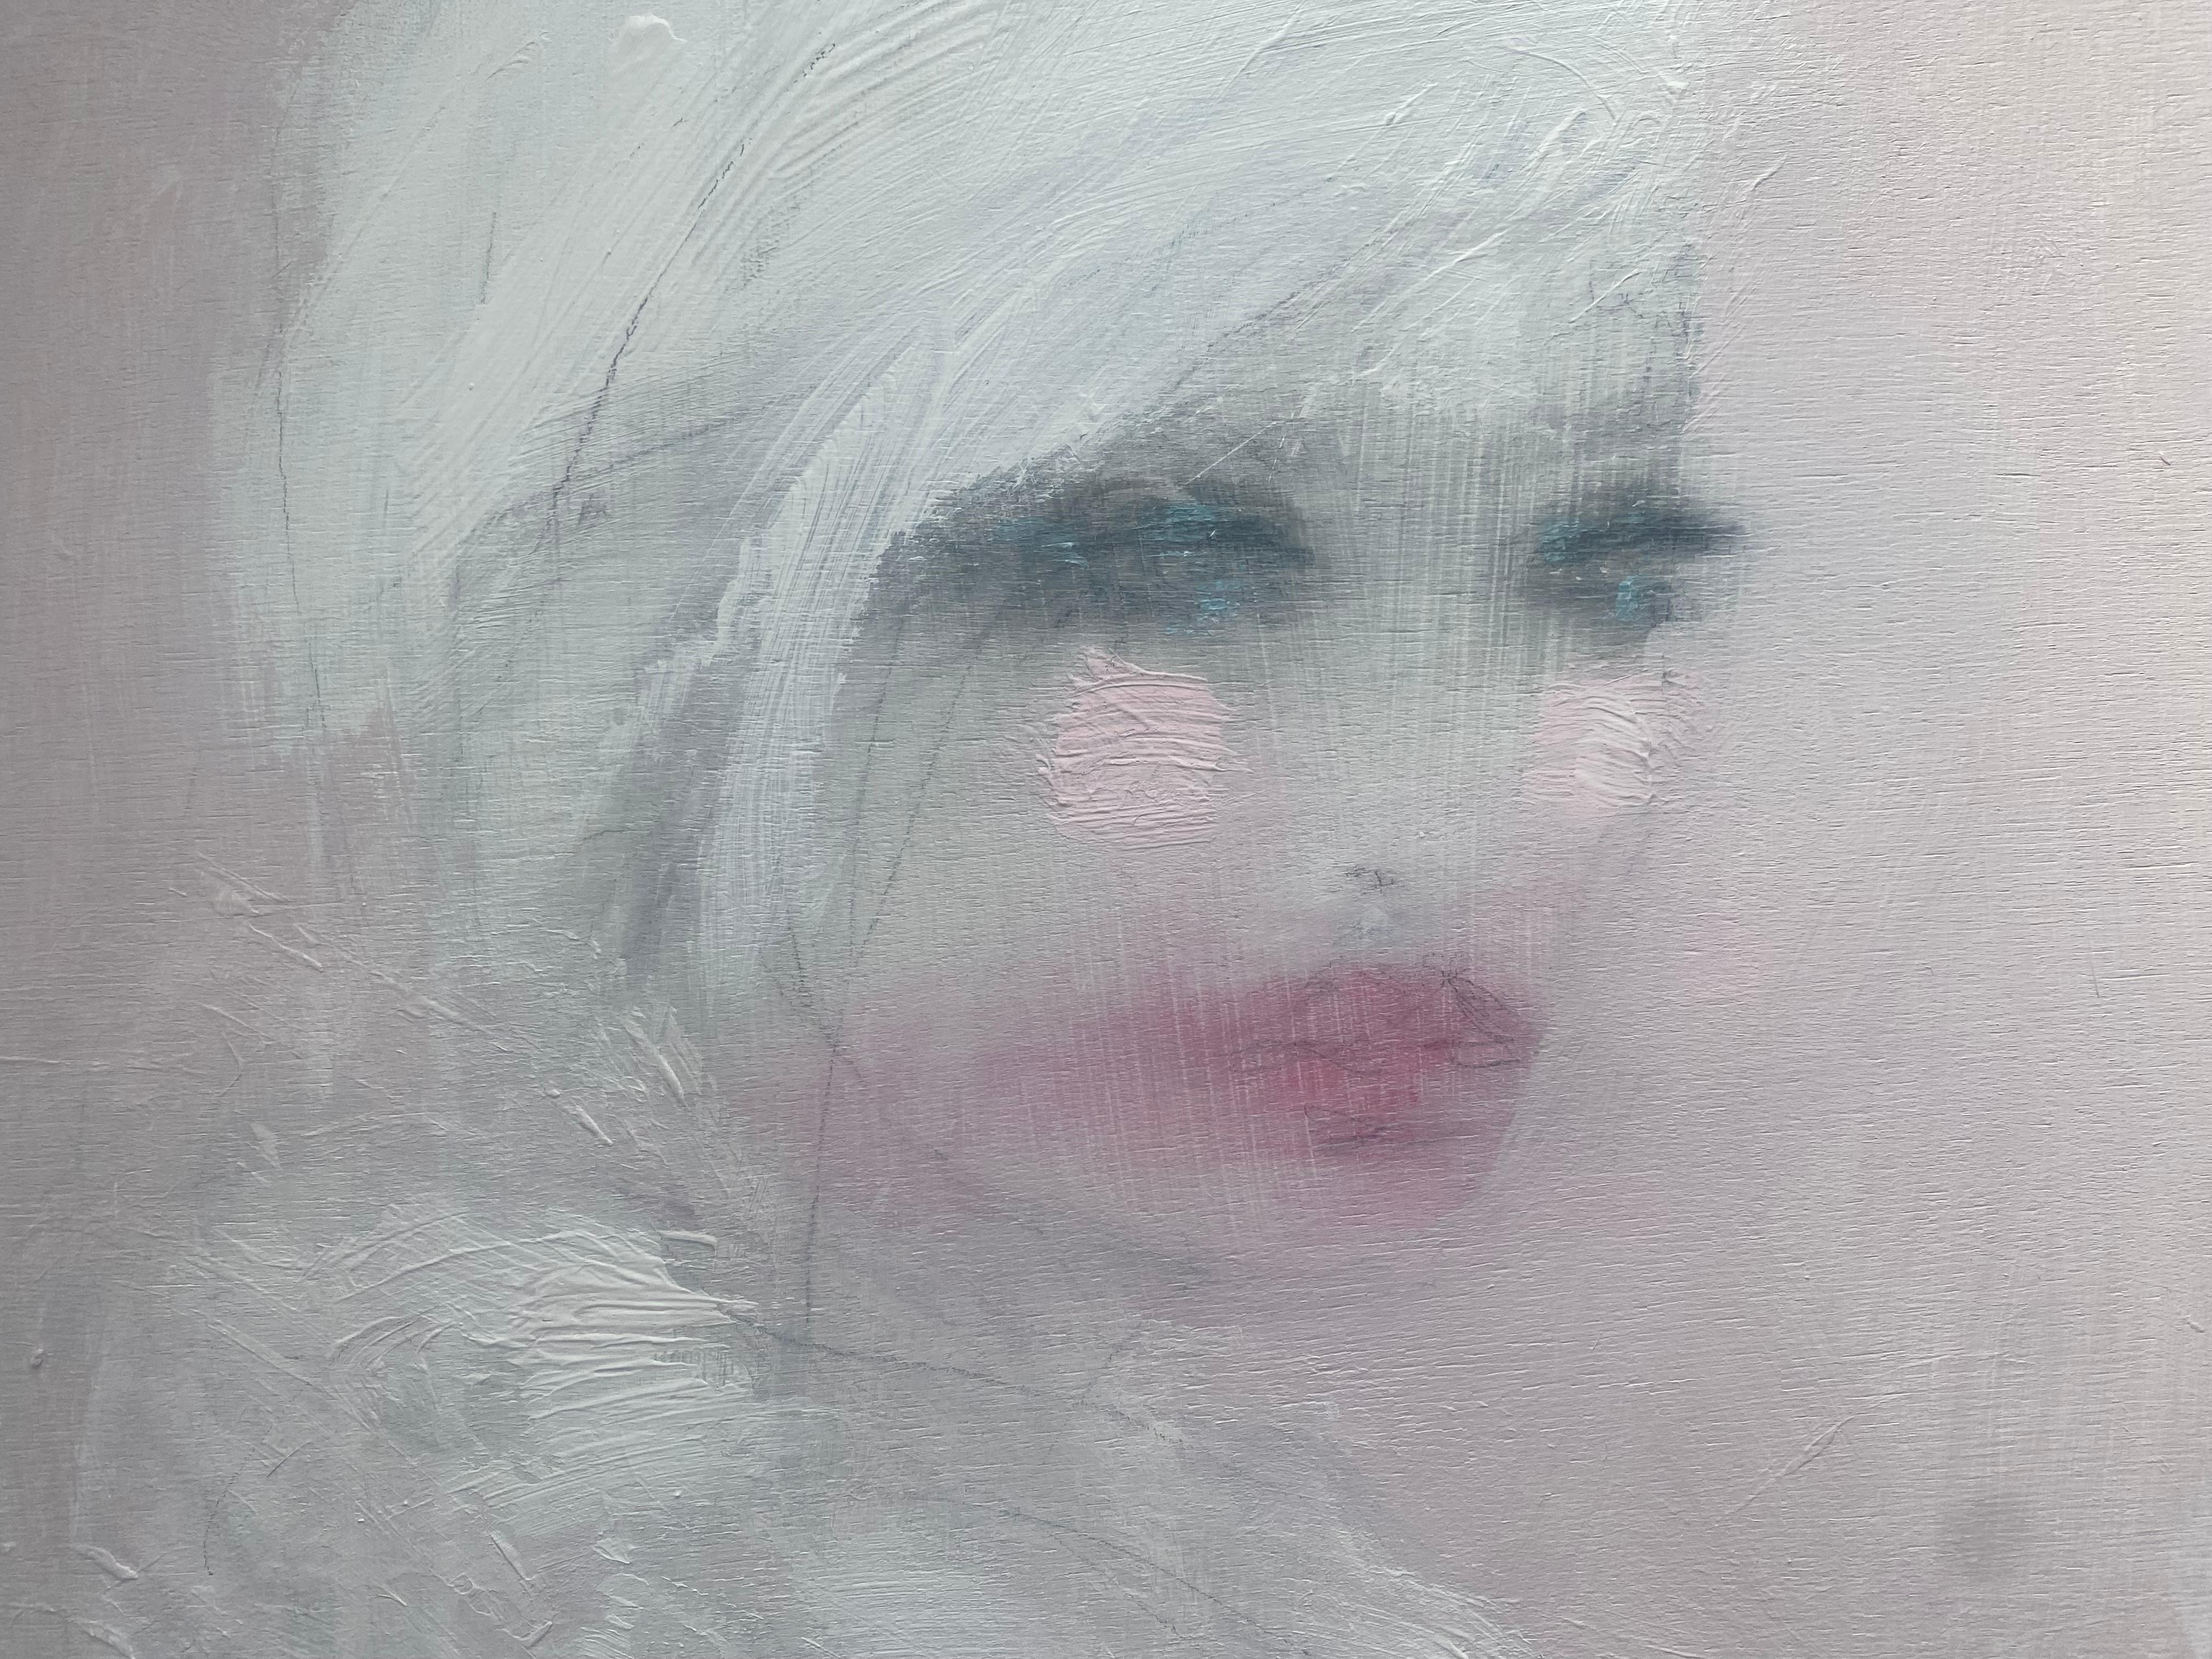 Feeling the beginning of Spring.

The painting shows a blurred portrait of a female. Pastel pinks, greys and white fill the composition with an ethereal blend of colour. The woman's lips and cheeks pop with a more vibrant pink.

ADDITIONAL